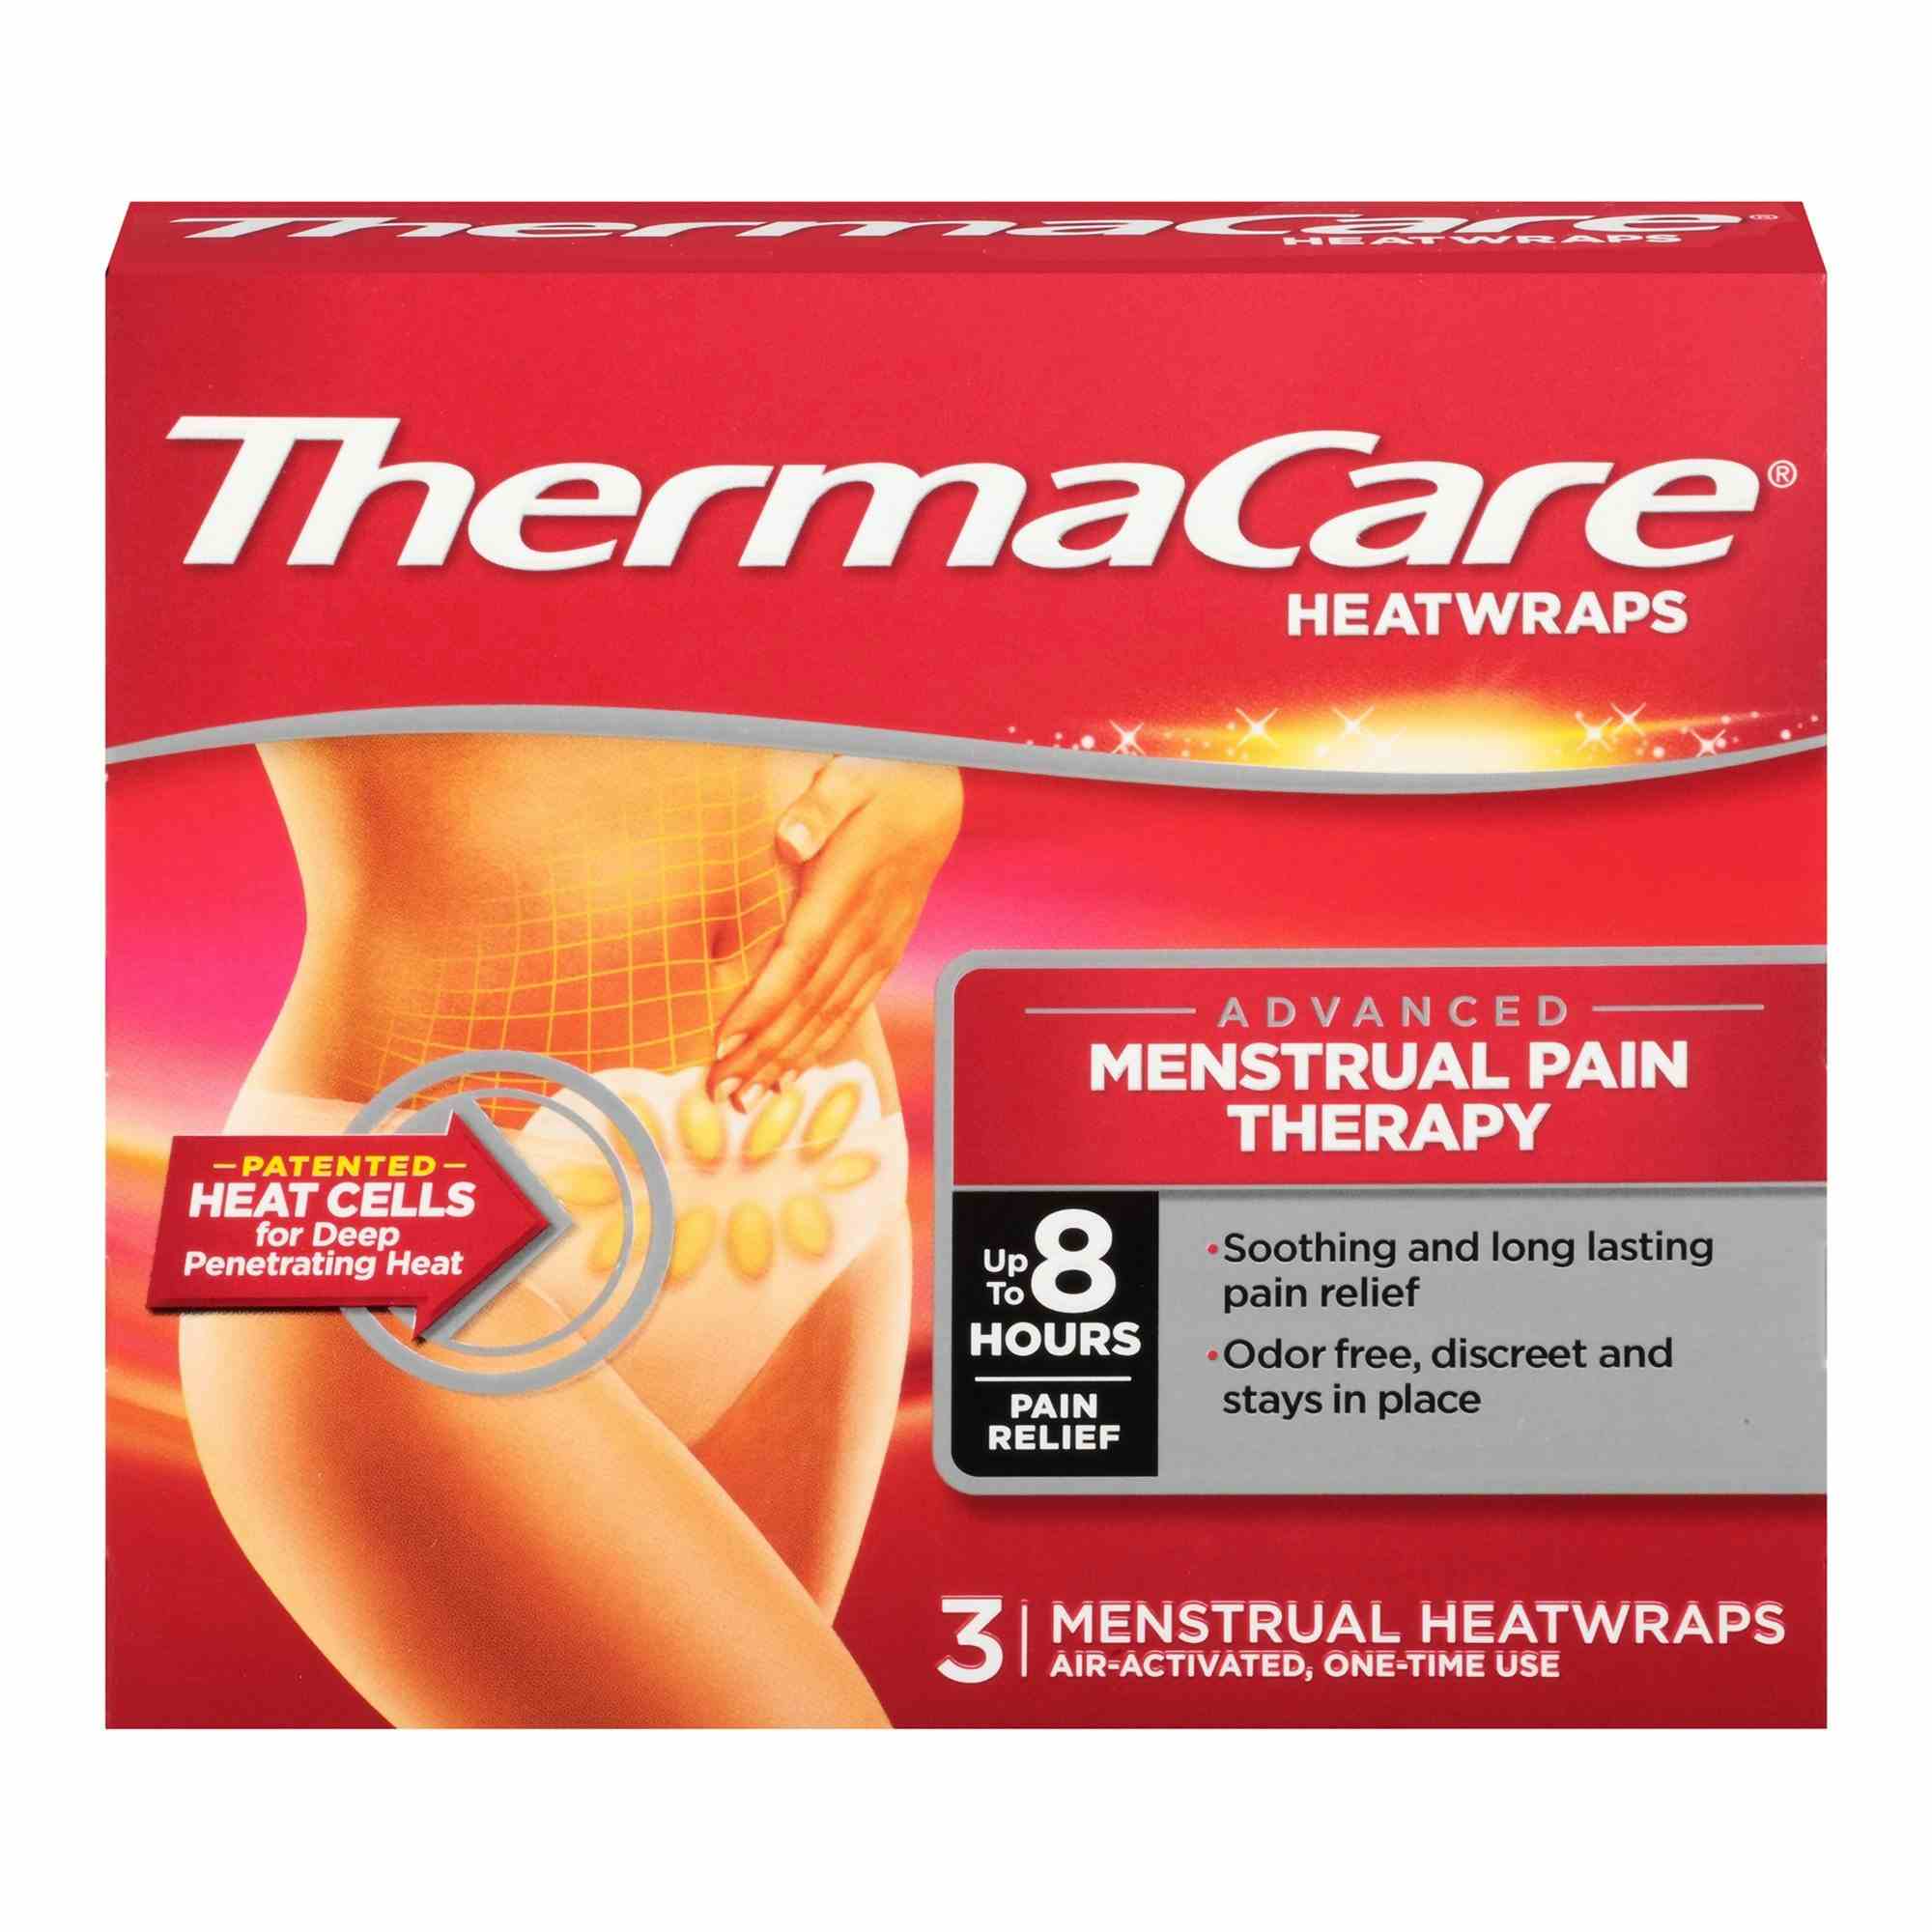 ThermaCare Heat Wraps, Advanced Menstrual Pain Therapy, 00573302002, Box of 3